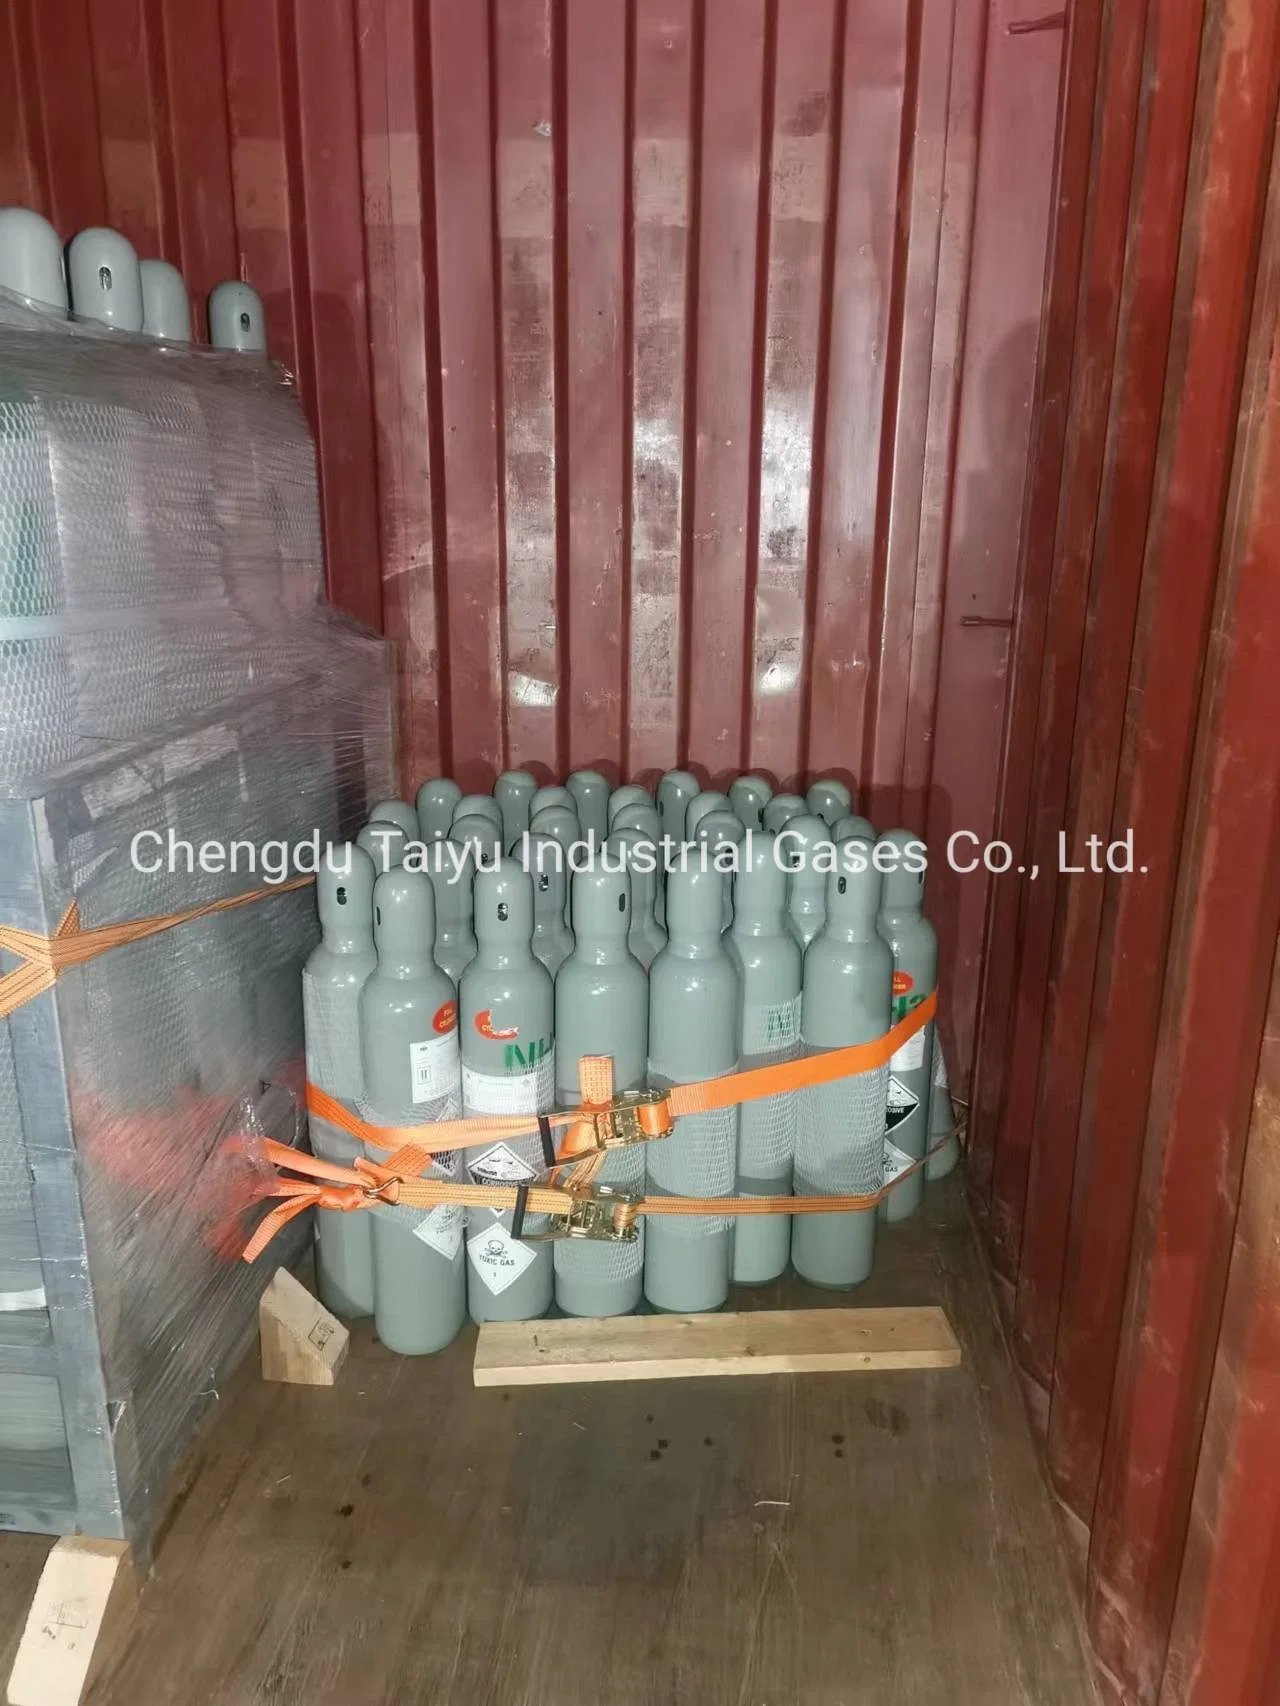 Wholesale/Supplier Price China Anhydrous Ammonia Price Ammonia Liquid Price of Anhydrous Ammonia Gas Nh3 99.8%